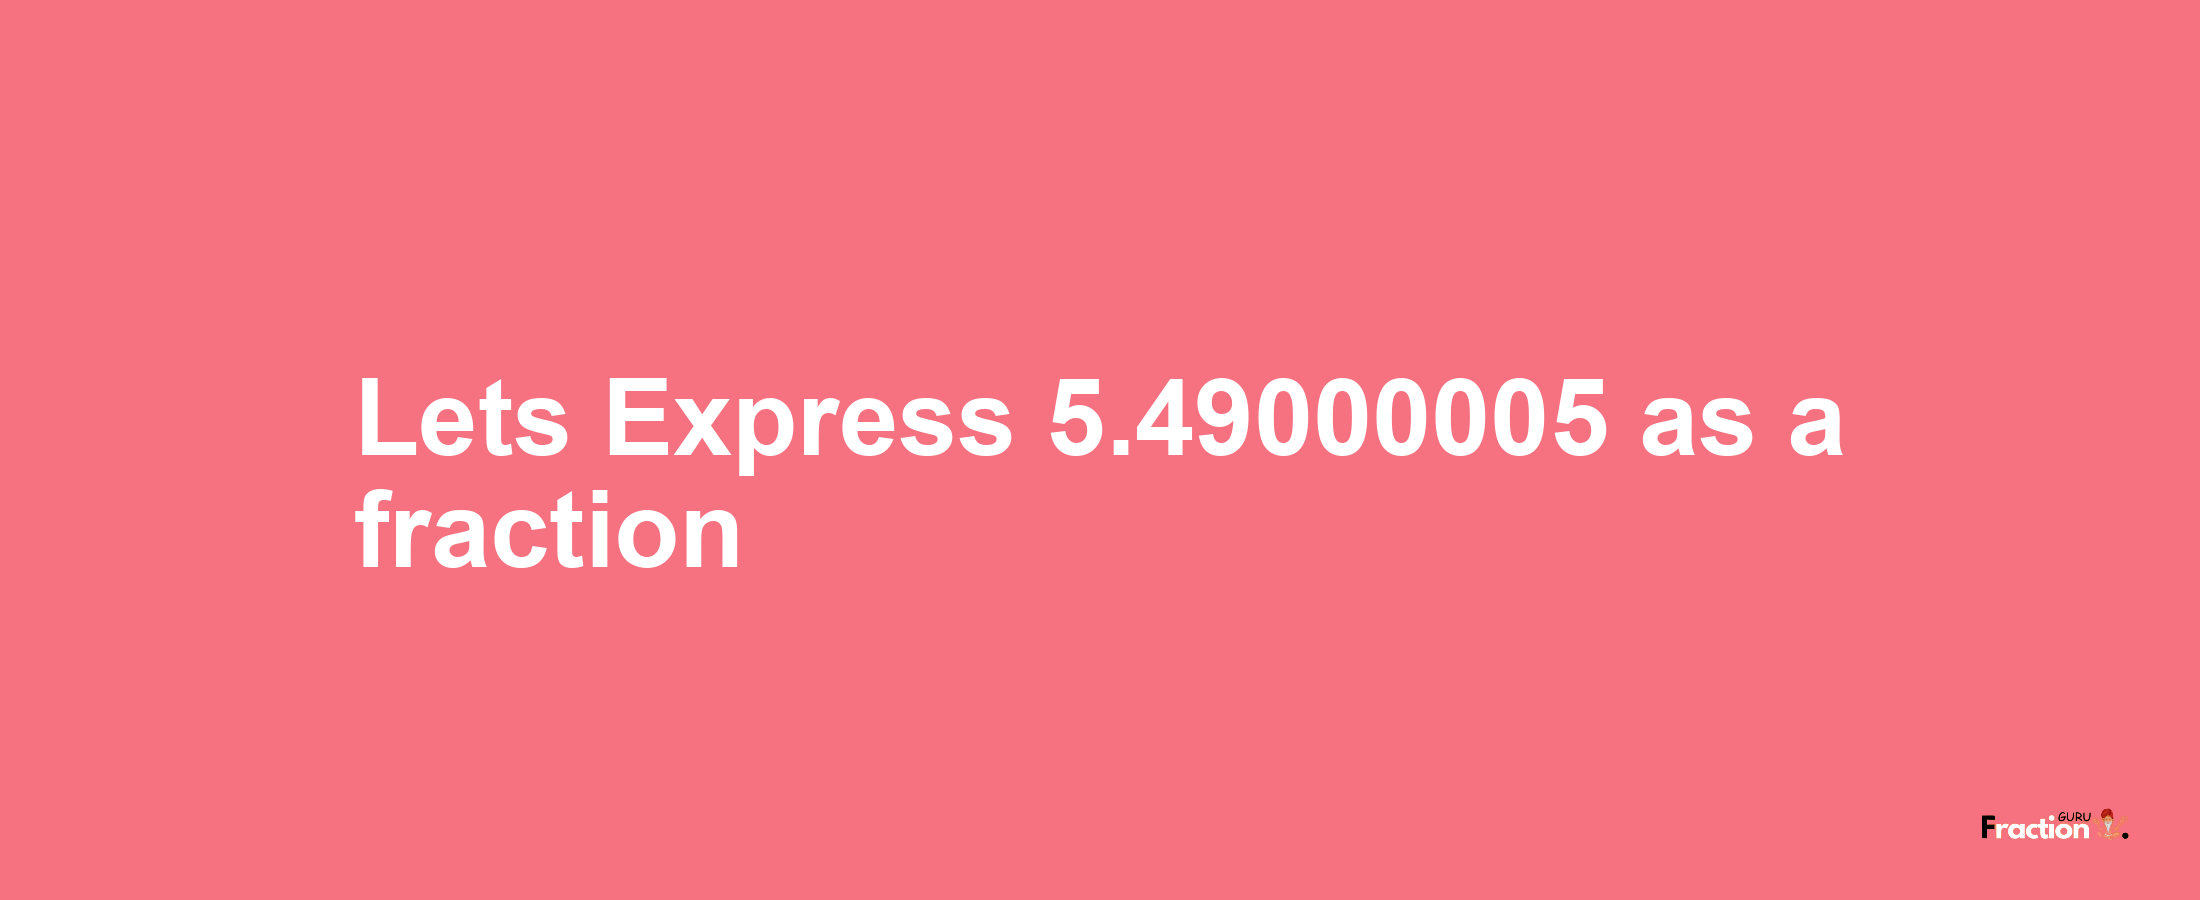 Lets Express 5.49000005 as afraction